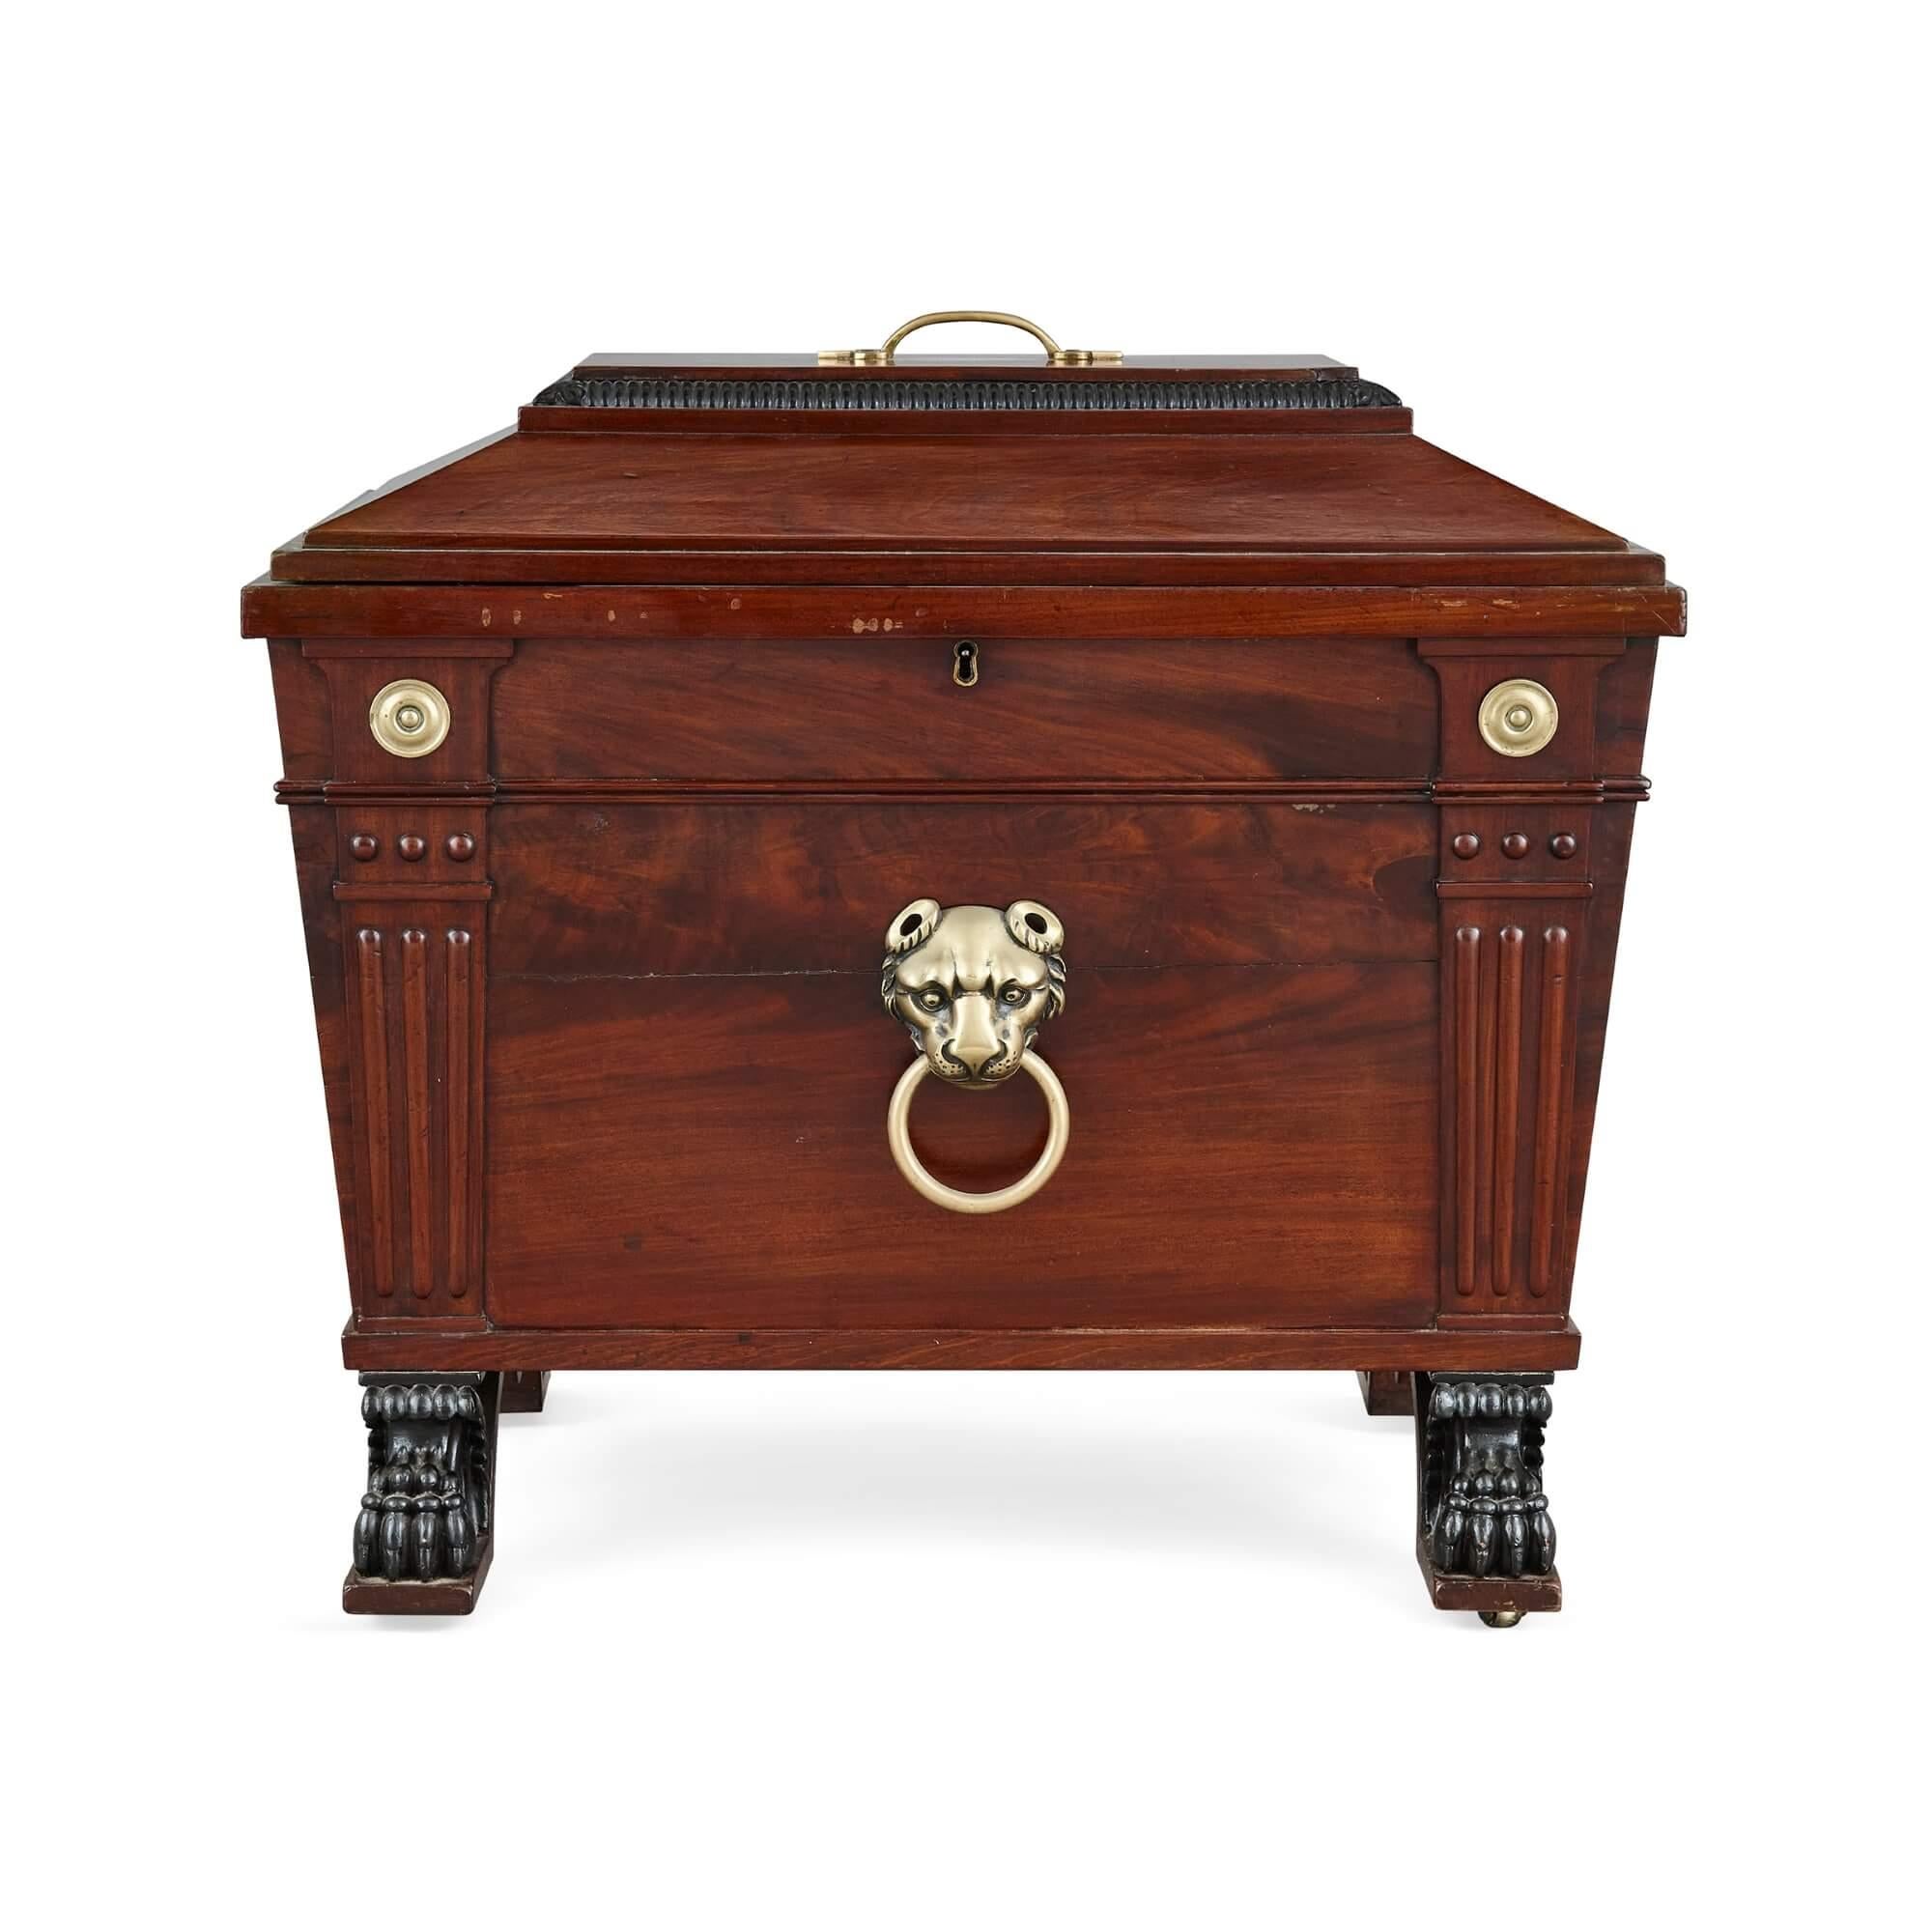 George IV Style Brass-Mounted Mahogany Wine Cooler
English, 19th Century
Height 63cm, width 70cm, depth 52cm

Made in English in the nineteenth century during the reign of George IV, this exceptional piece is a mahogany and brass-mounted wine